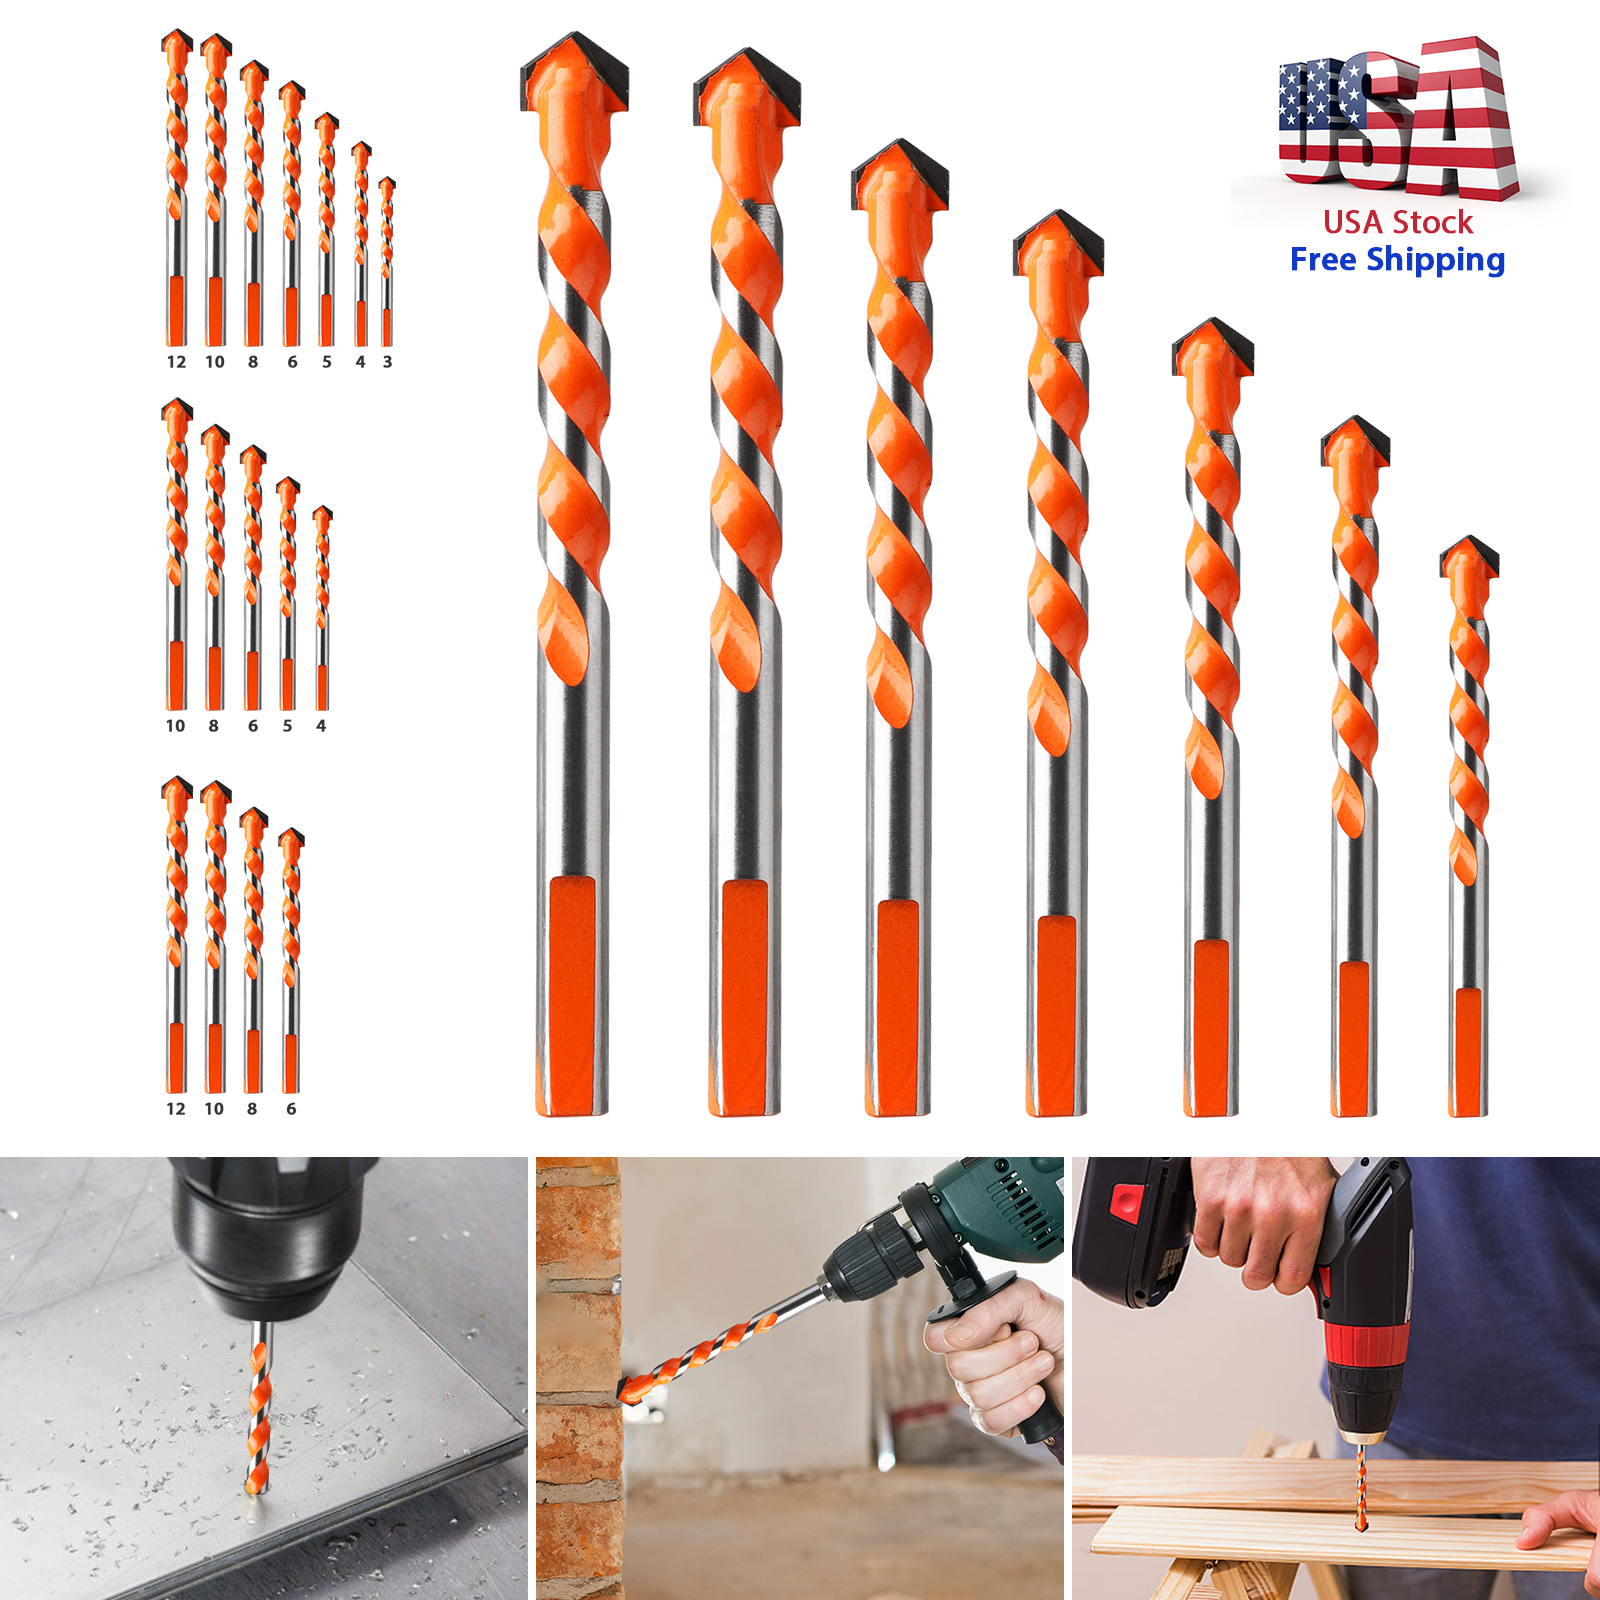 Multifunctional Ultimate Drill Bits Ceramic Glass Punching Hole Working 6mm-12mm 